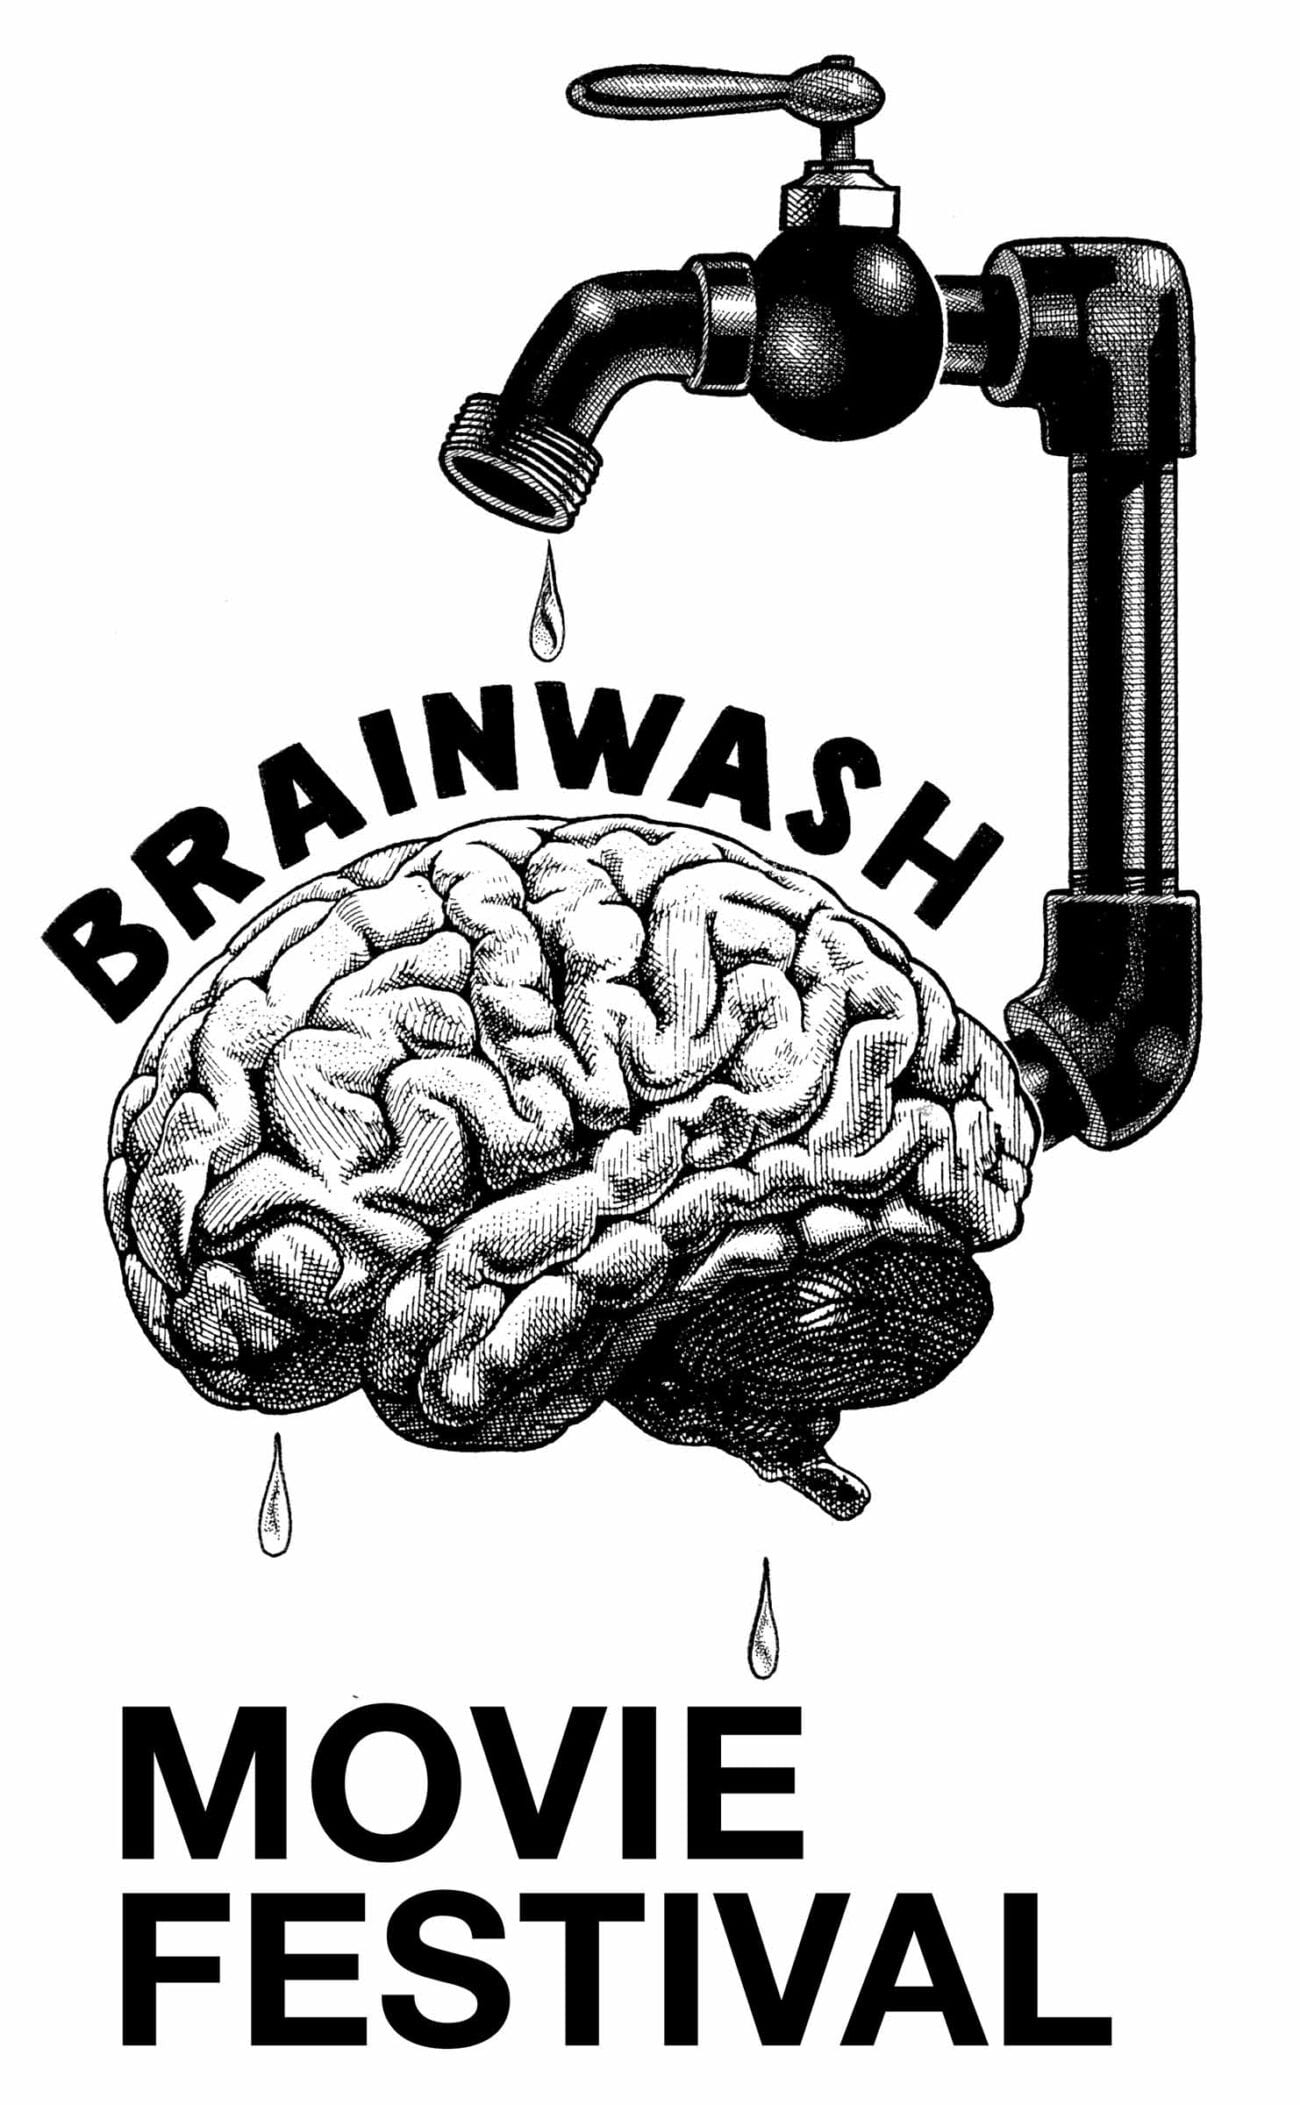 The Brainwash Movie Drive-in/Bike-in/Walk-in Festival is one of the most unique opportunities for indie filmmakers. But submissions are coming to a close!